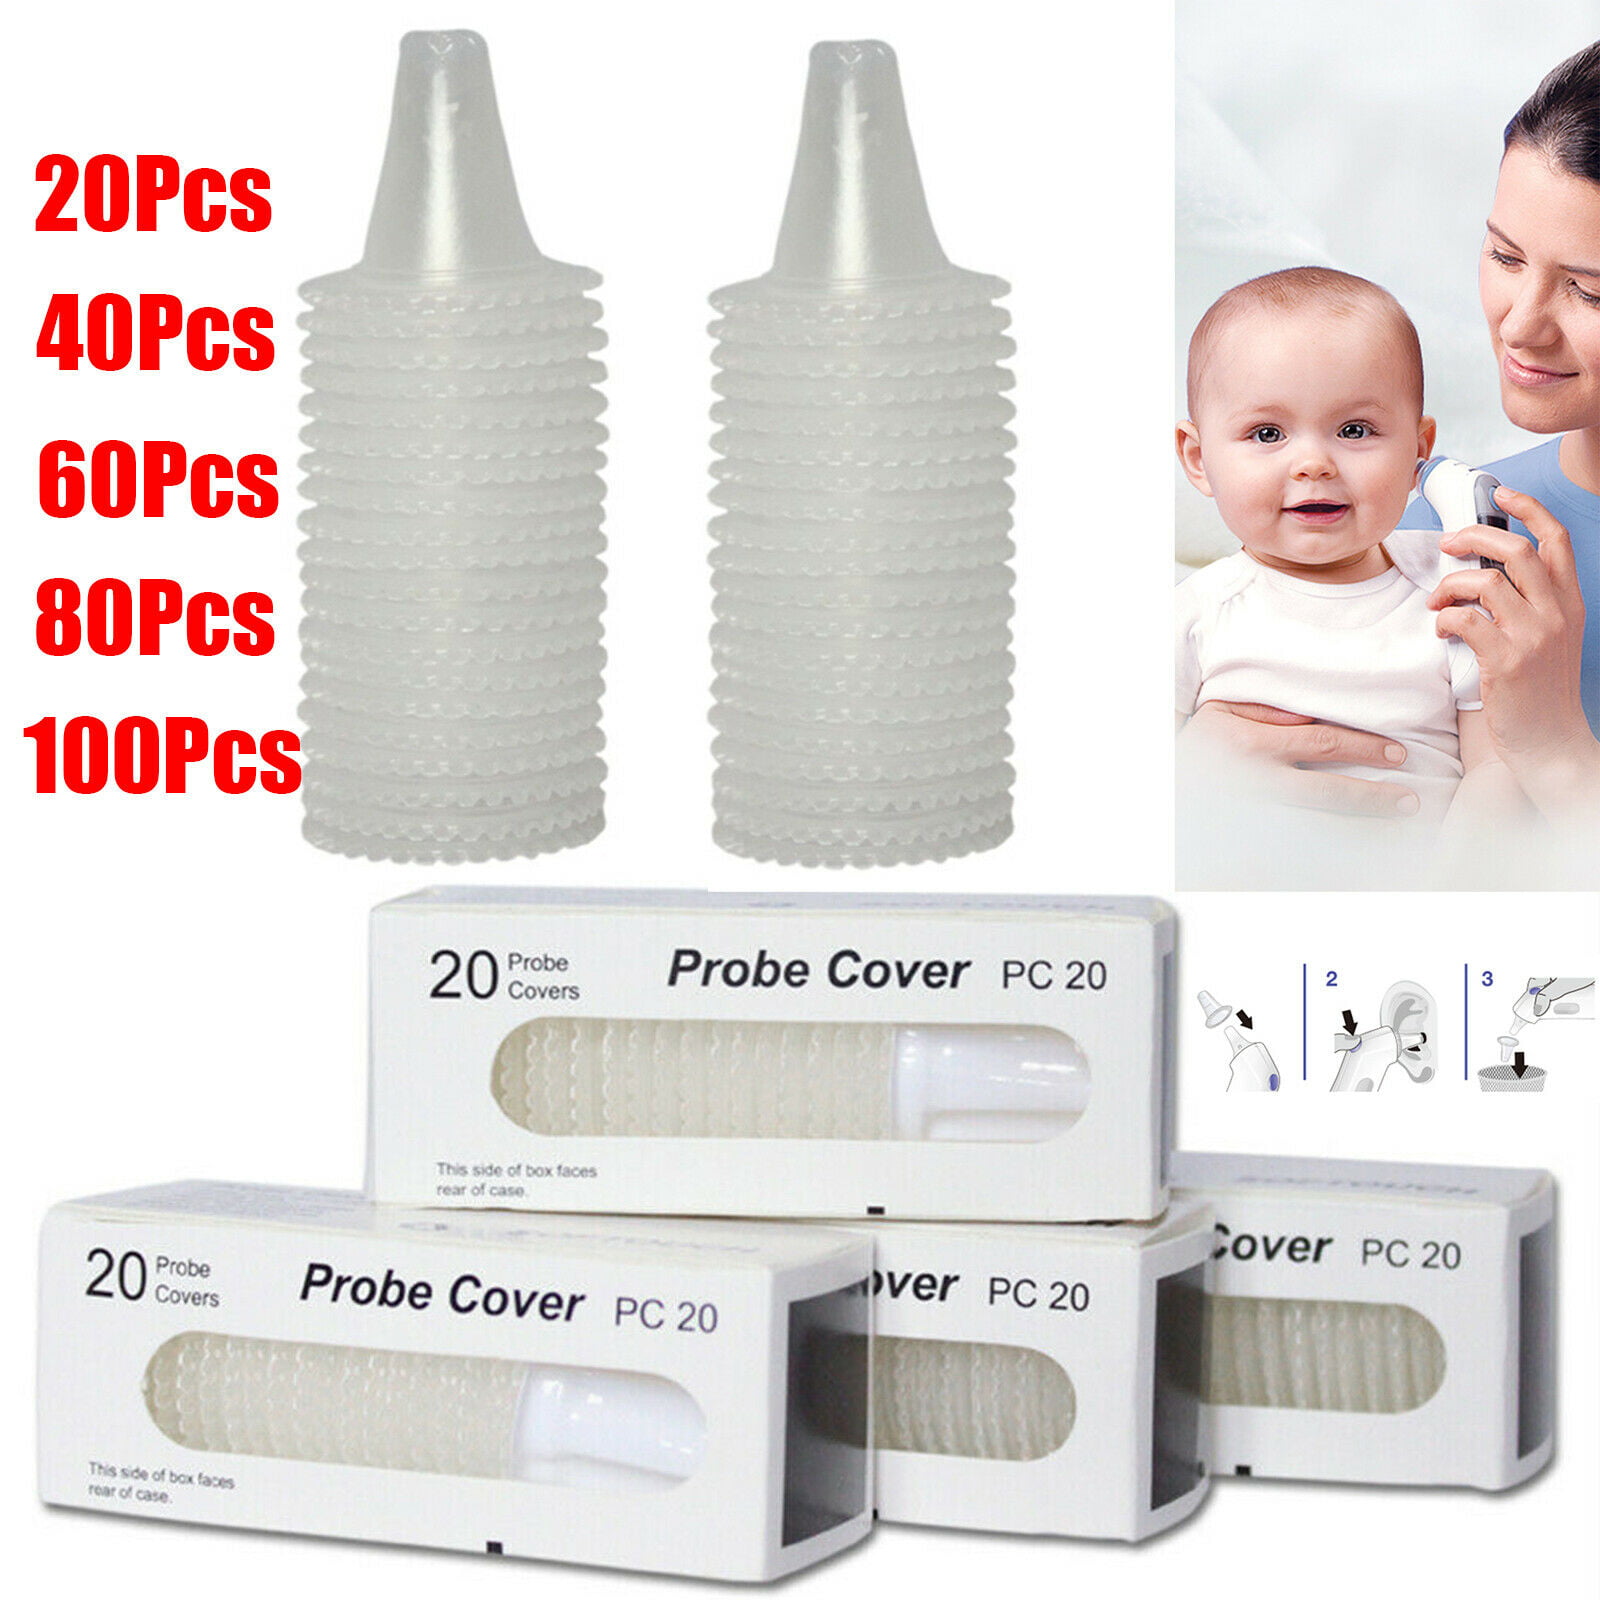 AGAWA 100Pcs Digital Thermometer Probe Covers Disposable Universal Electronic Thermometer Covers